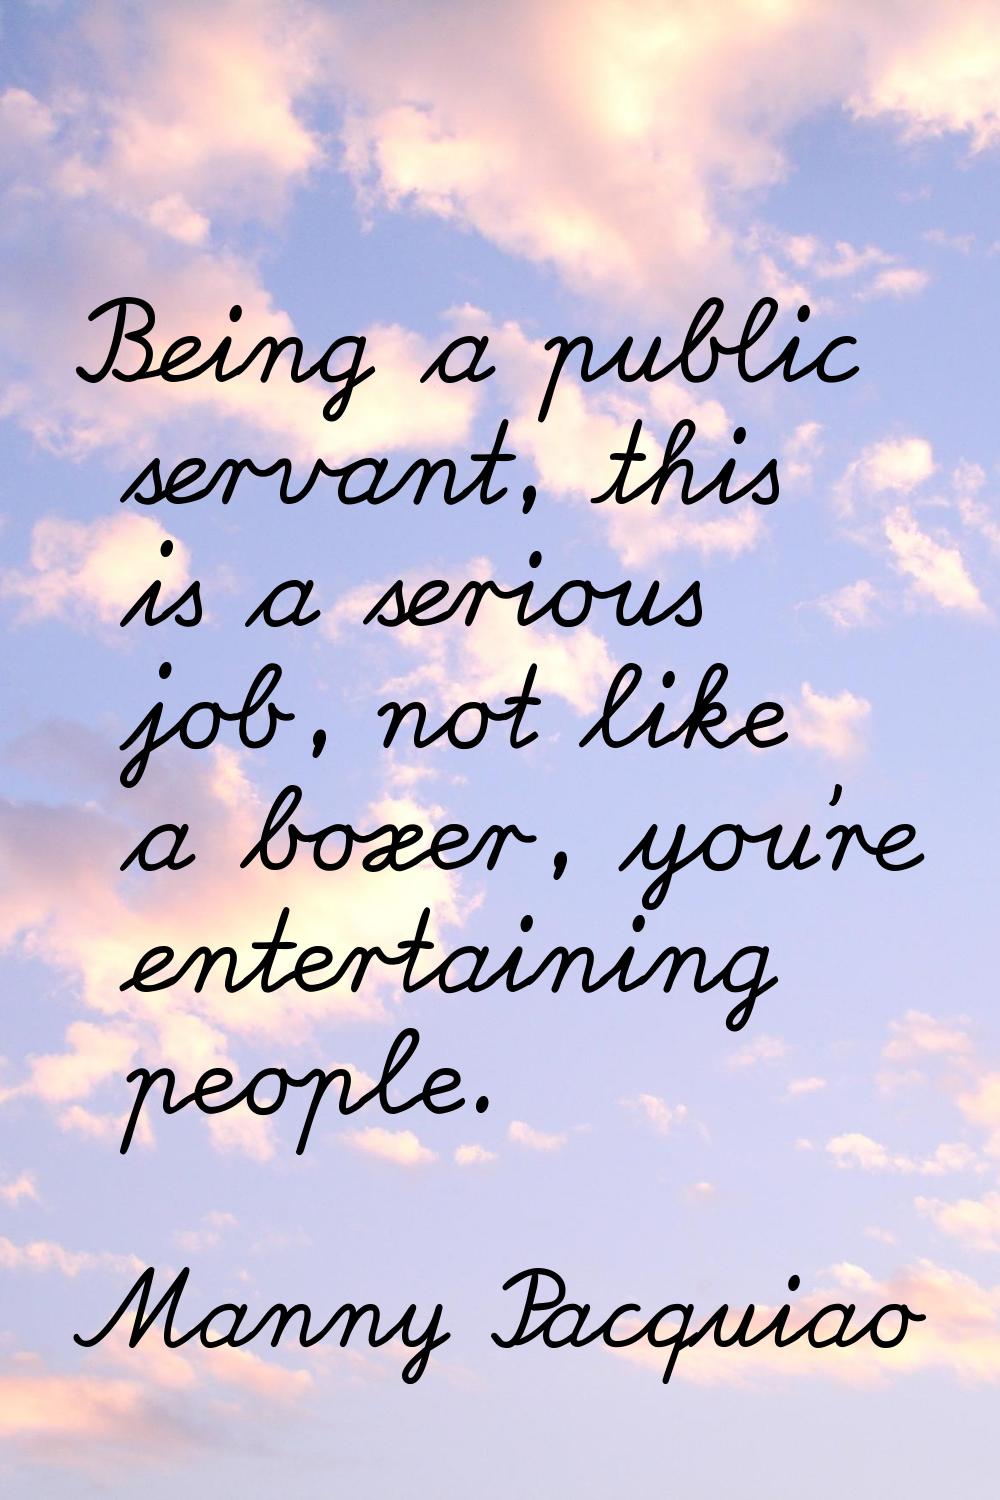 Being a public servant, this is a serious job, not like a boxer, you're entertaining people.